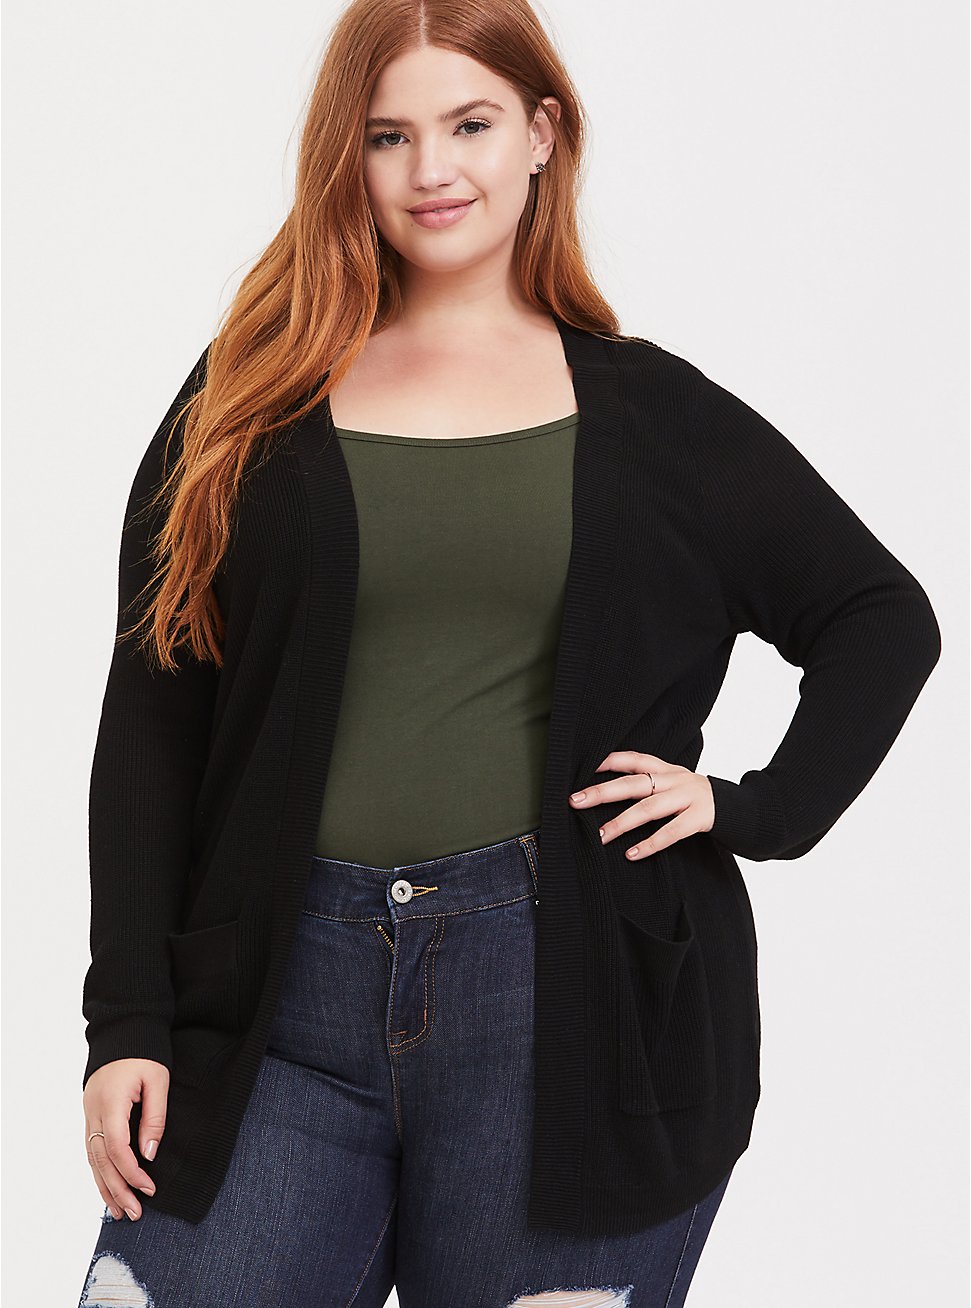 Cardigan Open Front Sweater